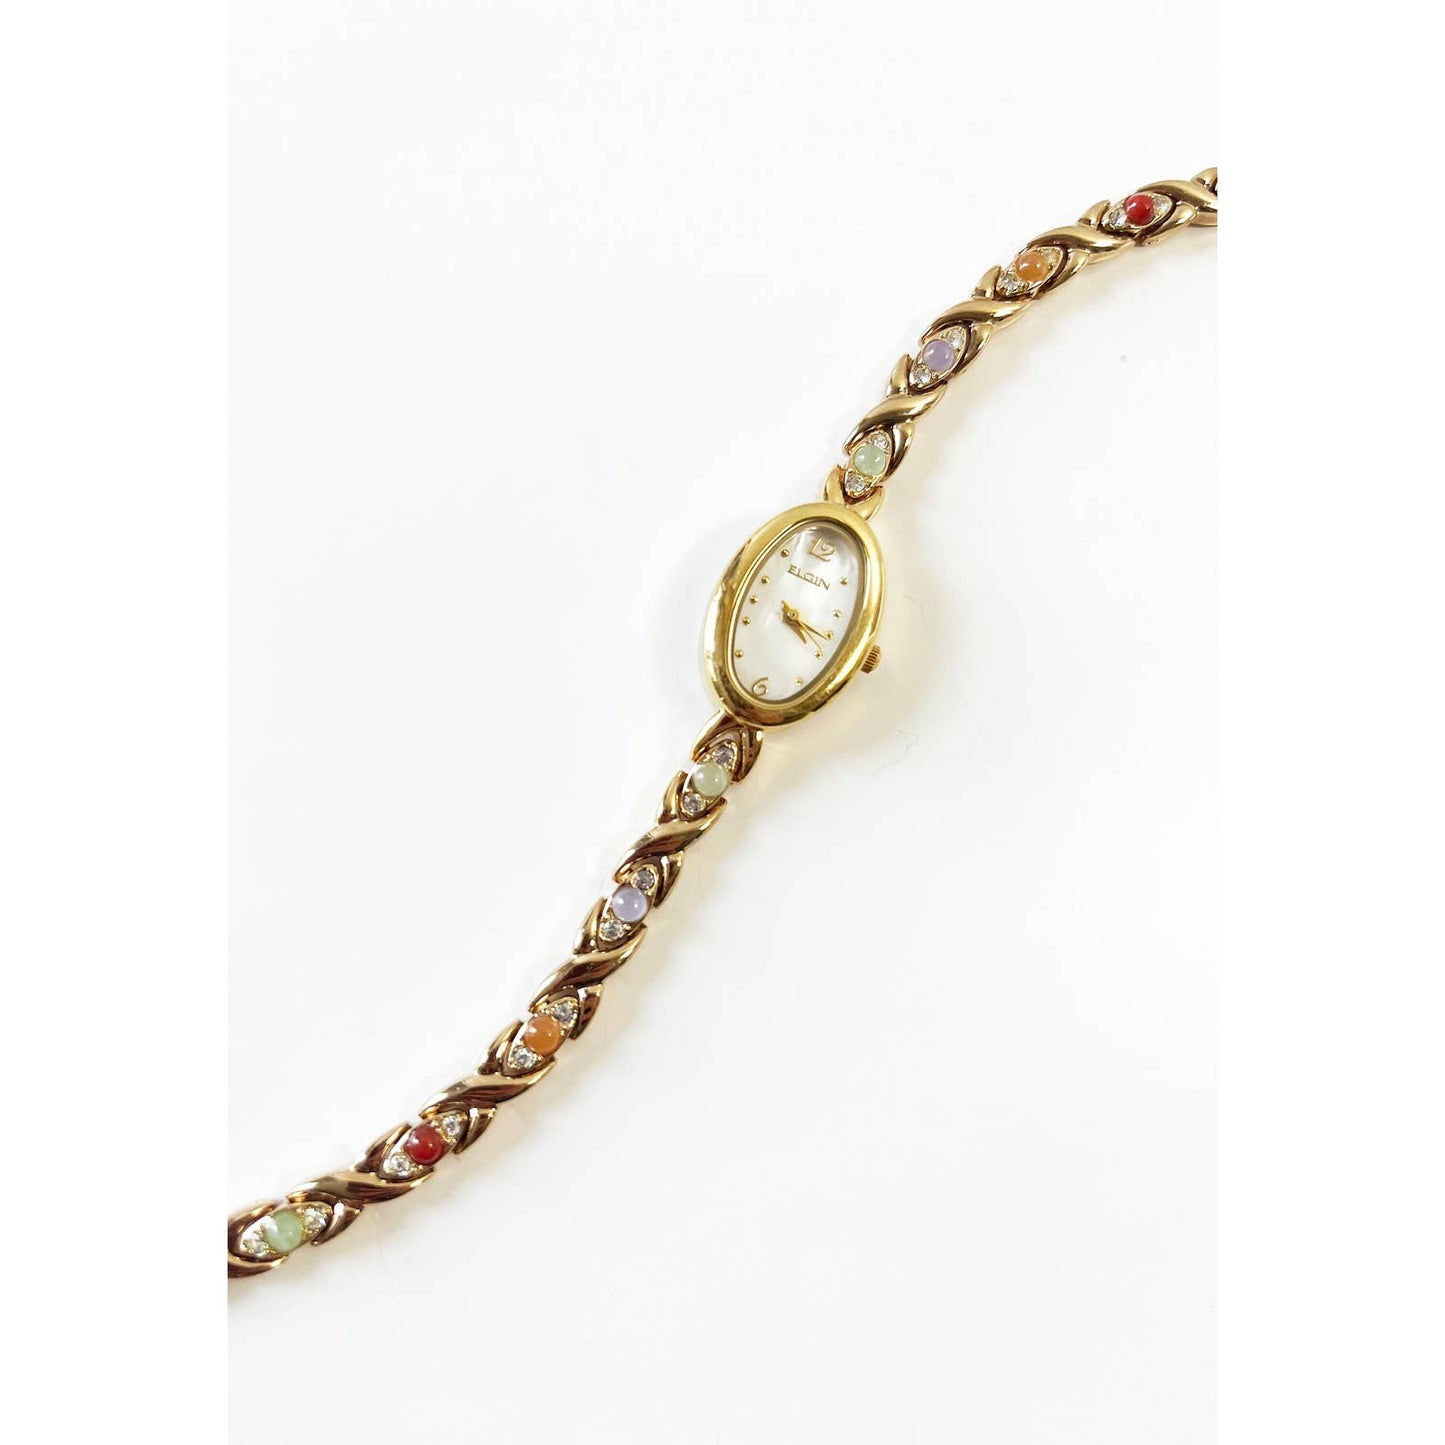 Vintage Small Gold Watch with Colorful Stones